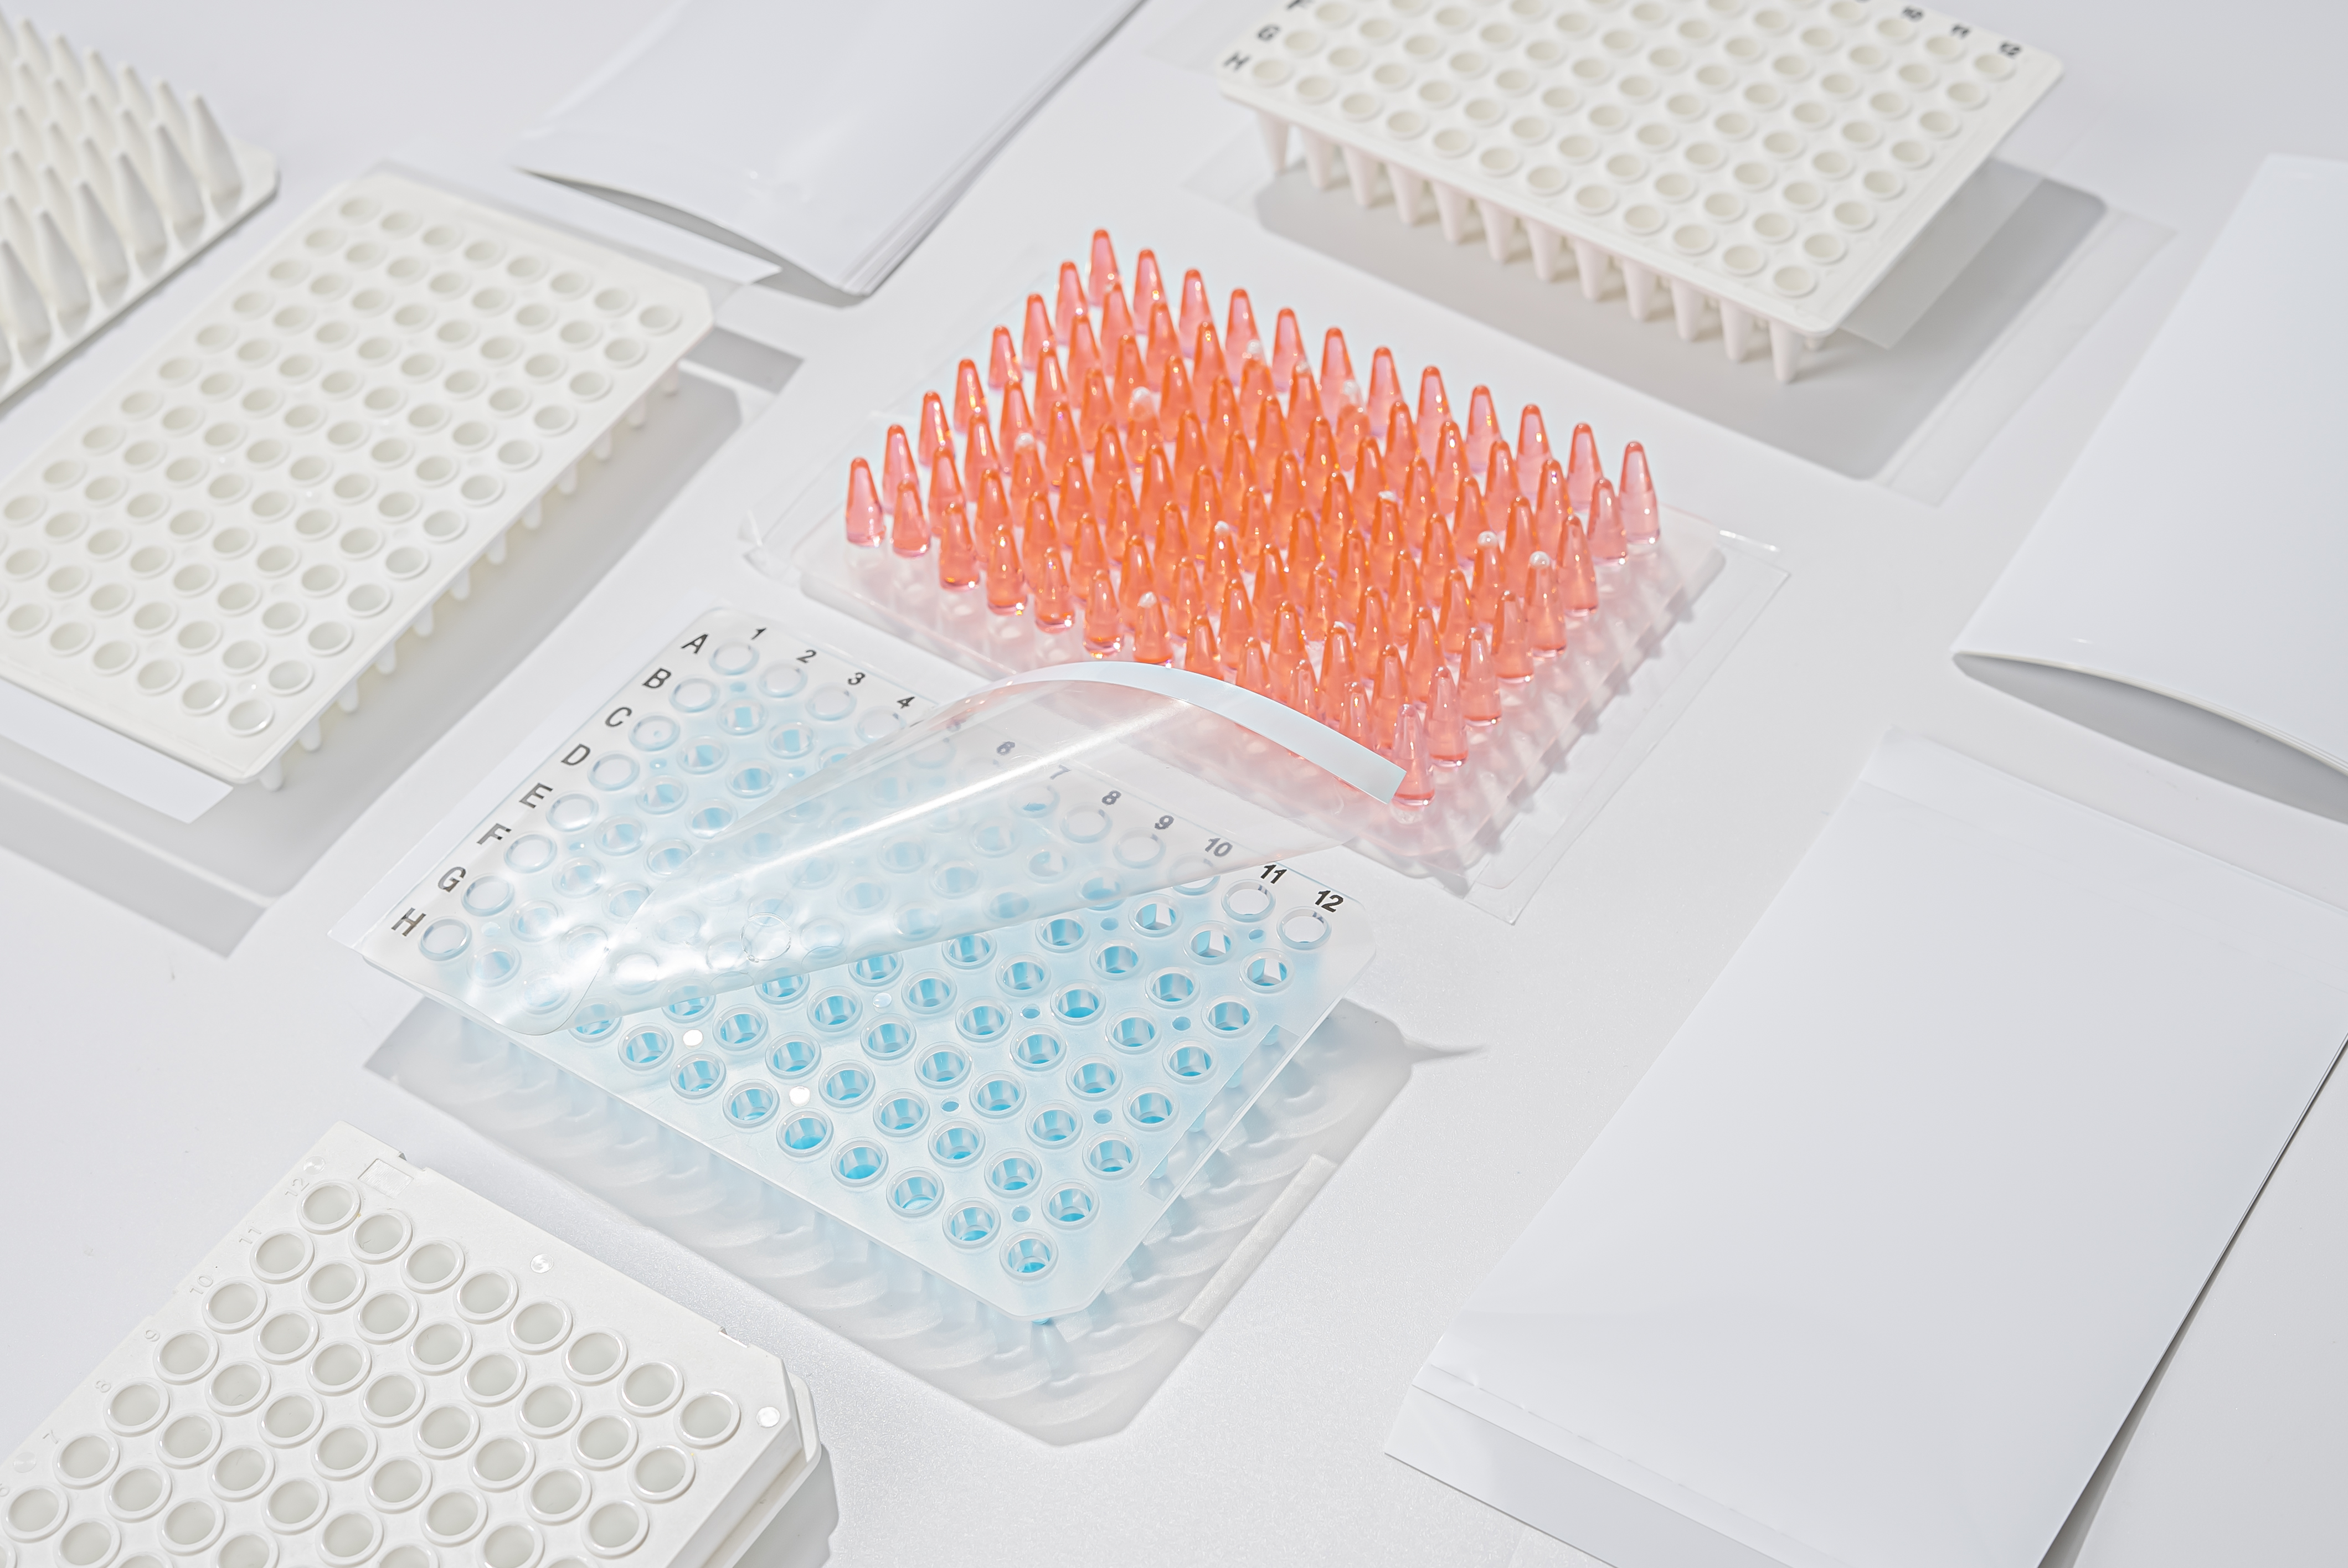 Simple tips on how to stay away from contamination during PCR